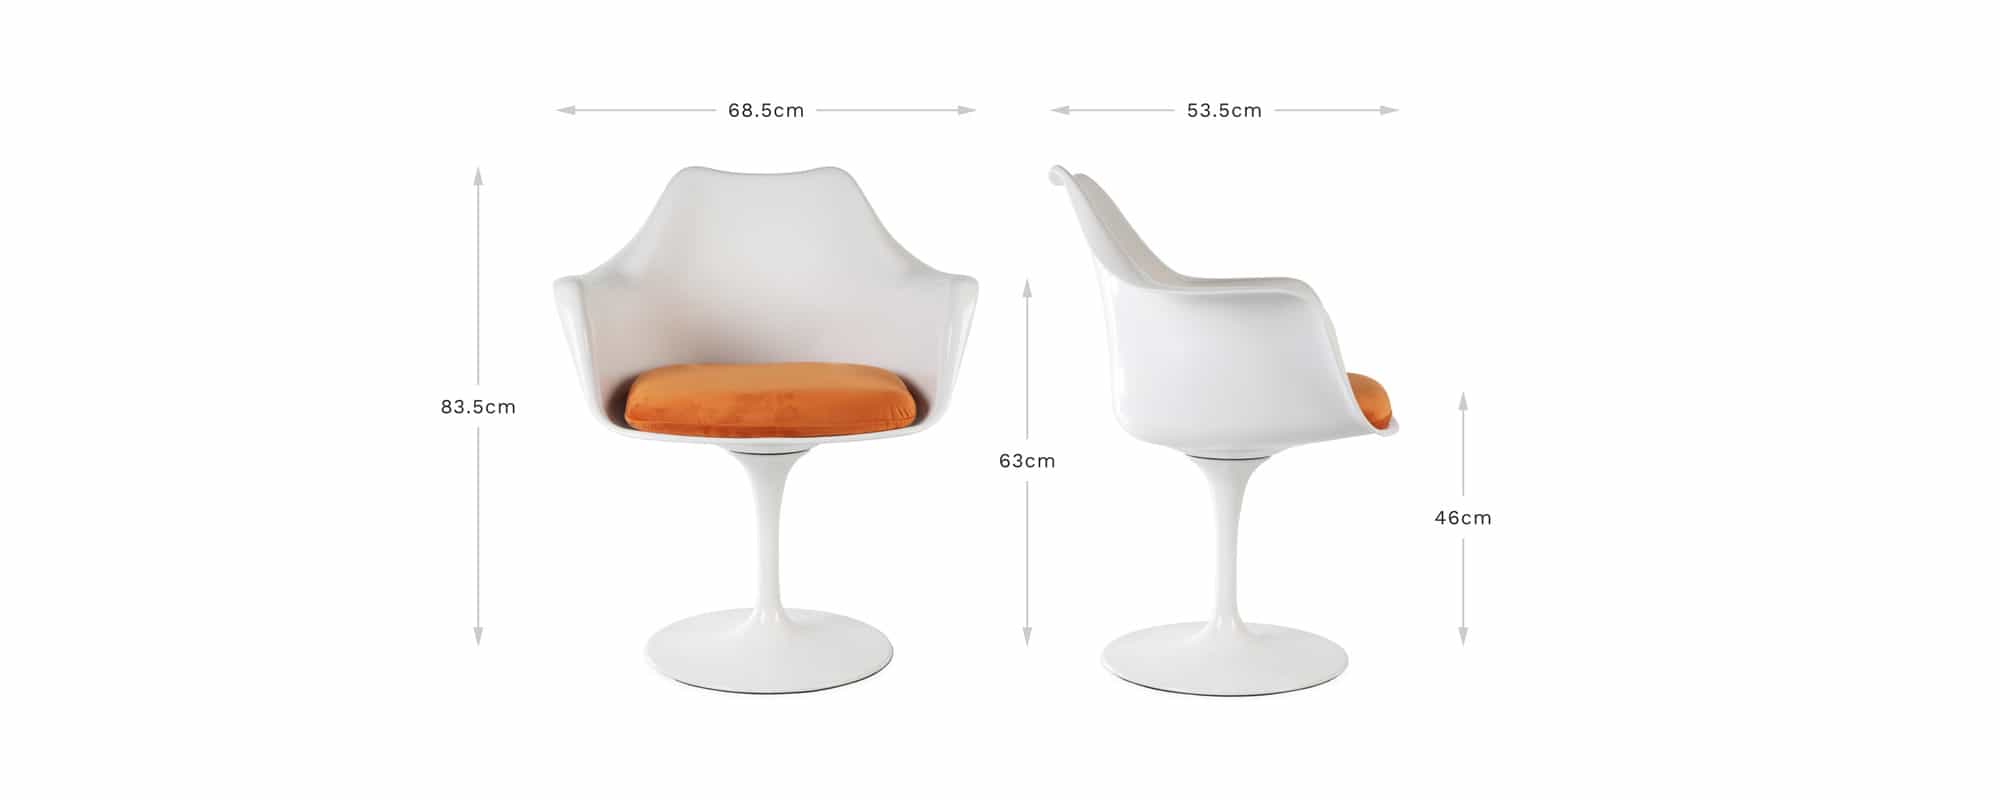 A banner image that gives the viewer a visual impression of the dimensions and specifications of the Saarinen Fibreglass Tulip Dining Arm Chair